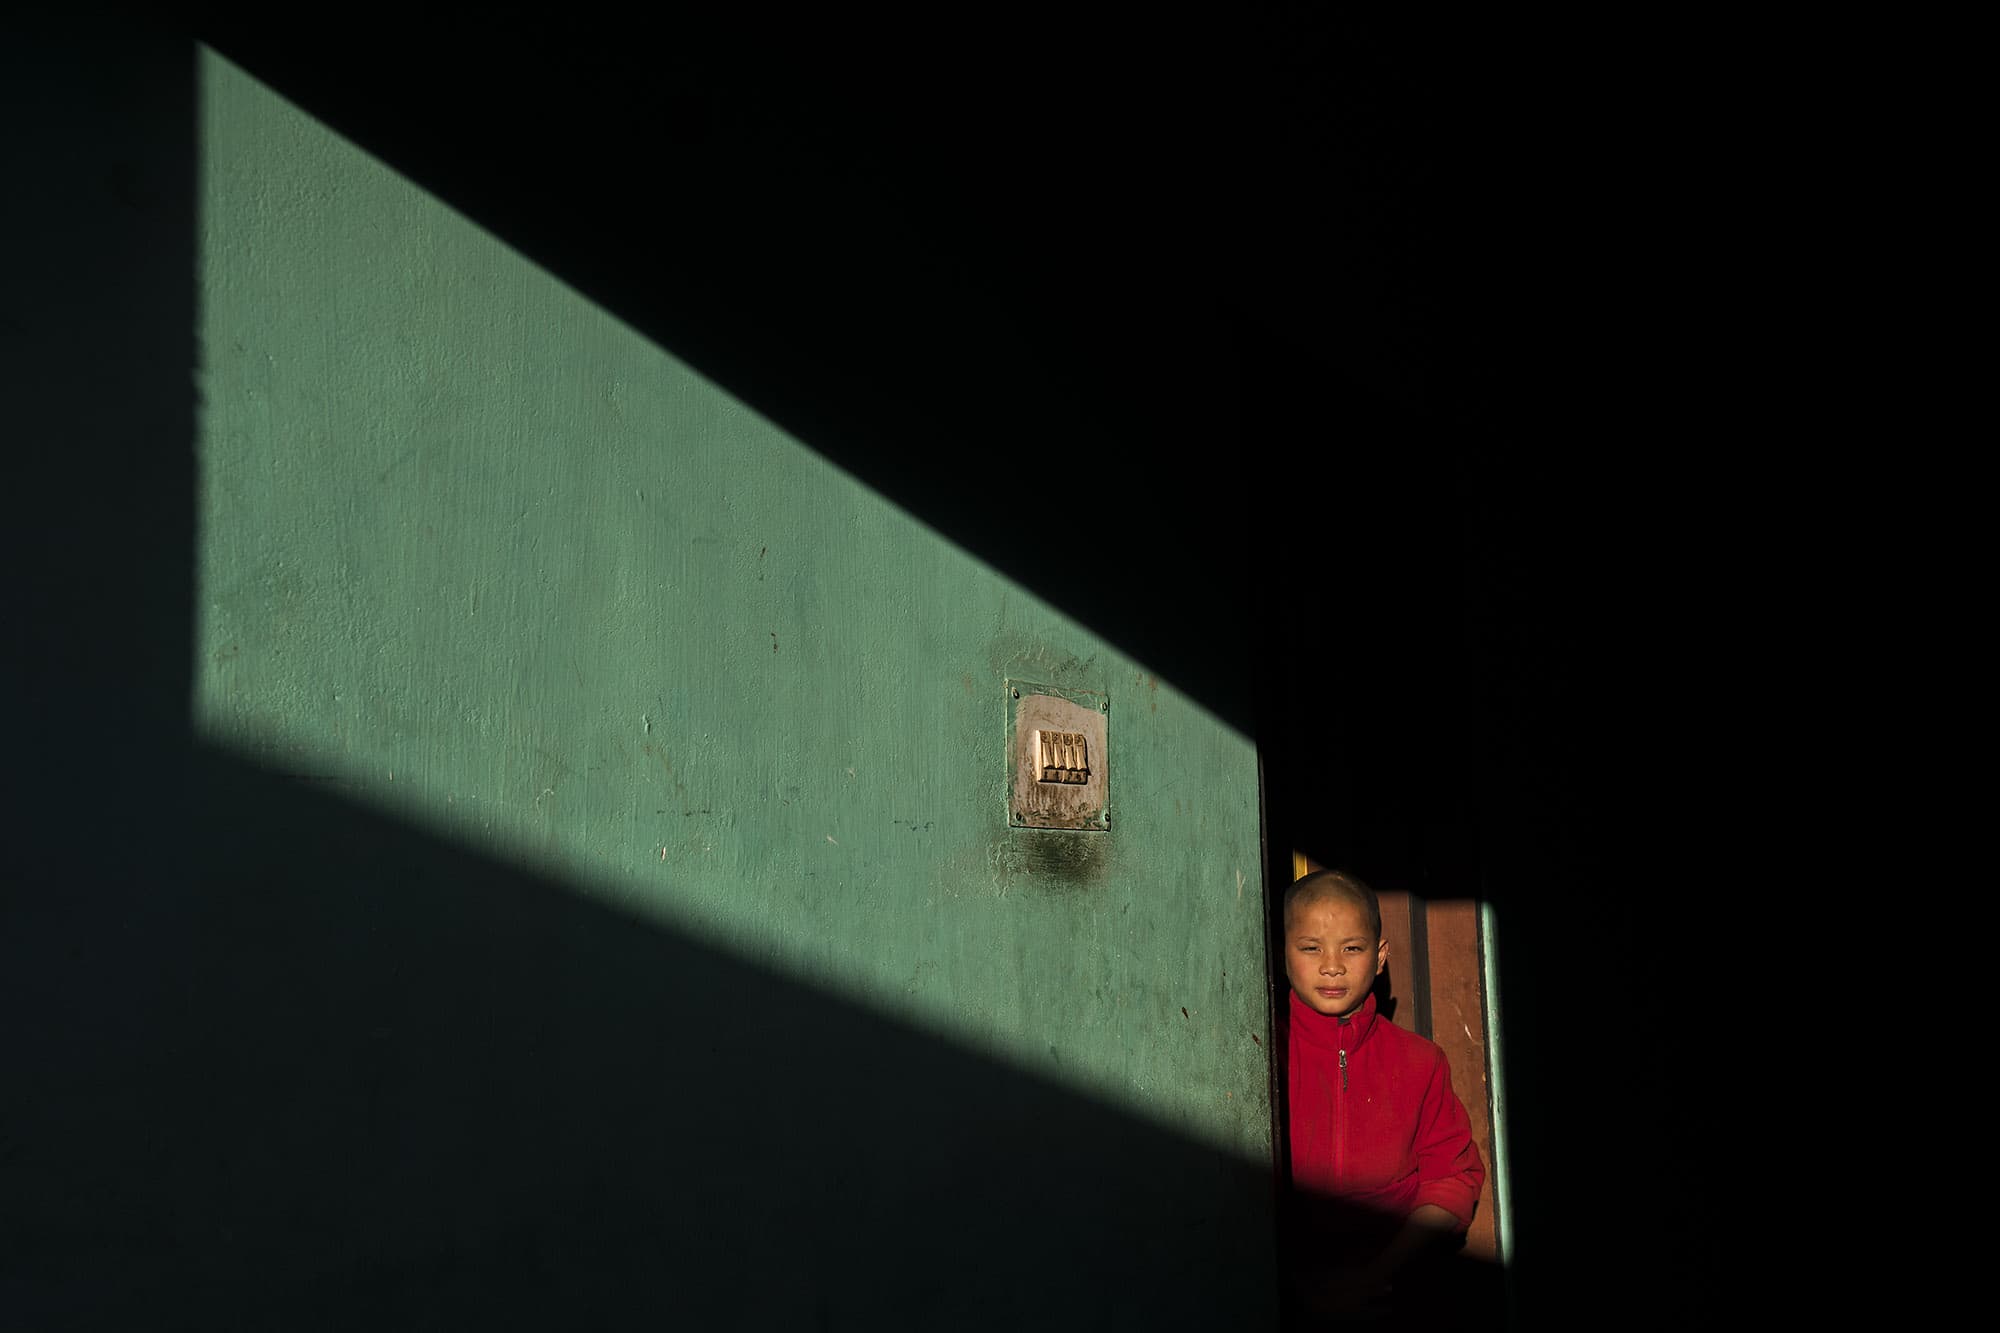 A young novice monk stands in a slice of golden hour light at Chimi Lhakhang, a Buddhist monastery perched on a hill just outside Punakha, Bhutan on December 6, 2017.  Bhutan’s natural light is soft and golden and while smiling monks in flowing maroon robes inhabit the ancient monasteries that dot the craggy countryside.  The young boy posed for this portrait at the request of the photographer.